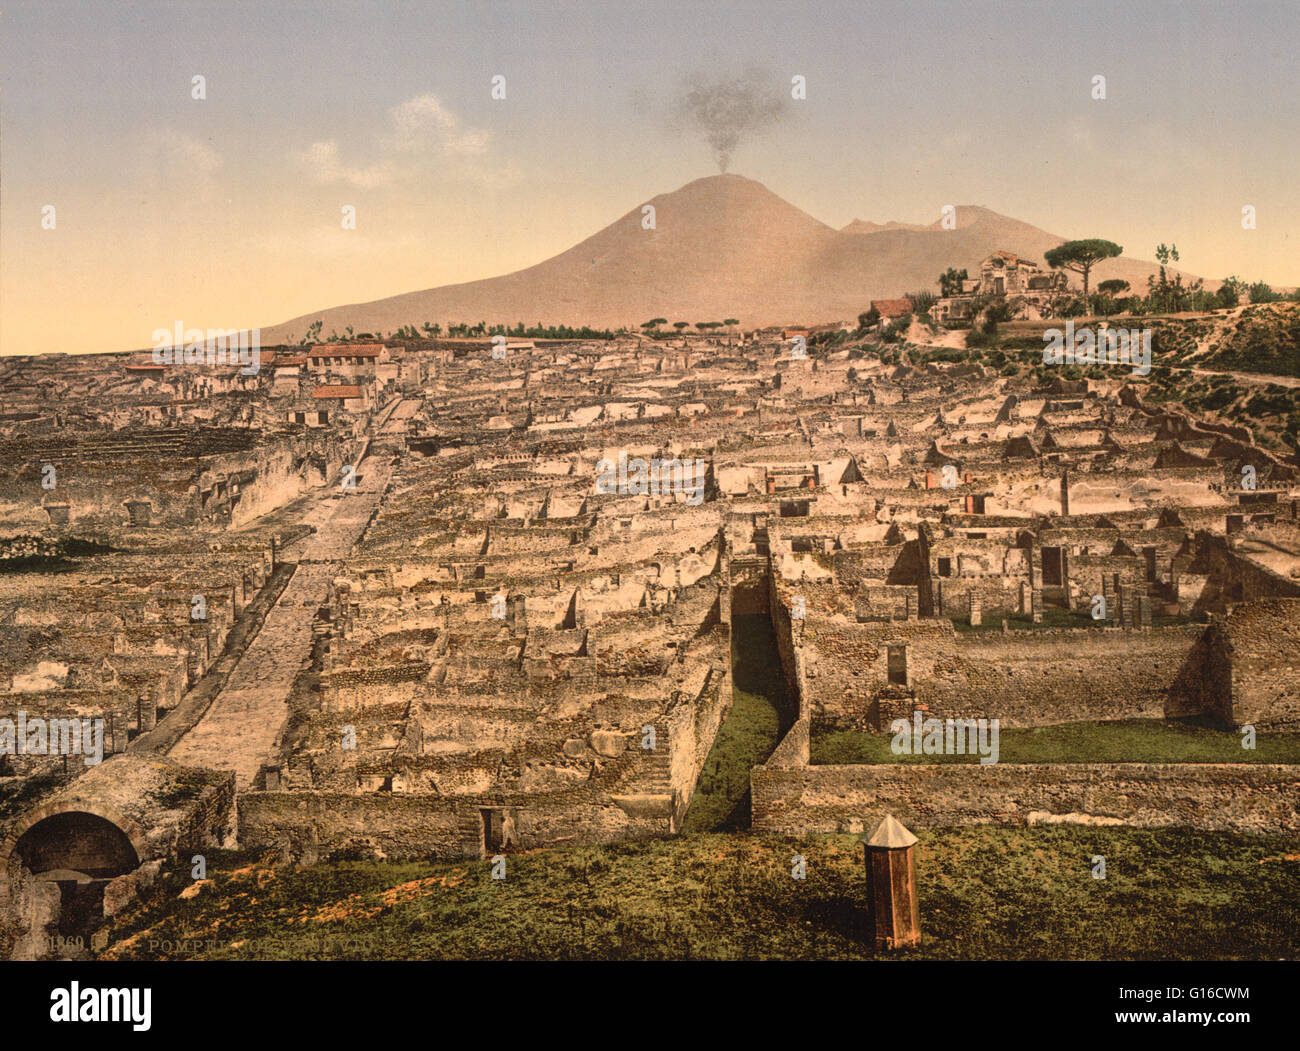 The city of Pompeii was an ancient Roman town-city near modern Naples ... - The City Of Pompeii Was An Ancient Roman Town City Near MoDern Naples G16CWM